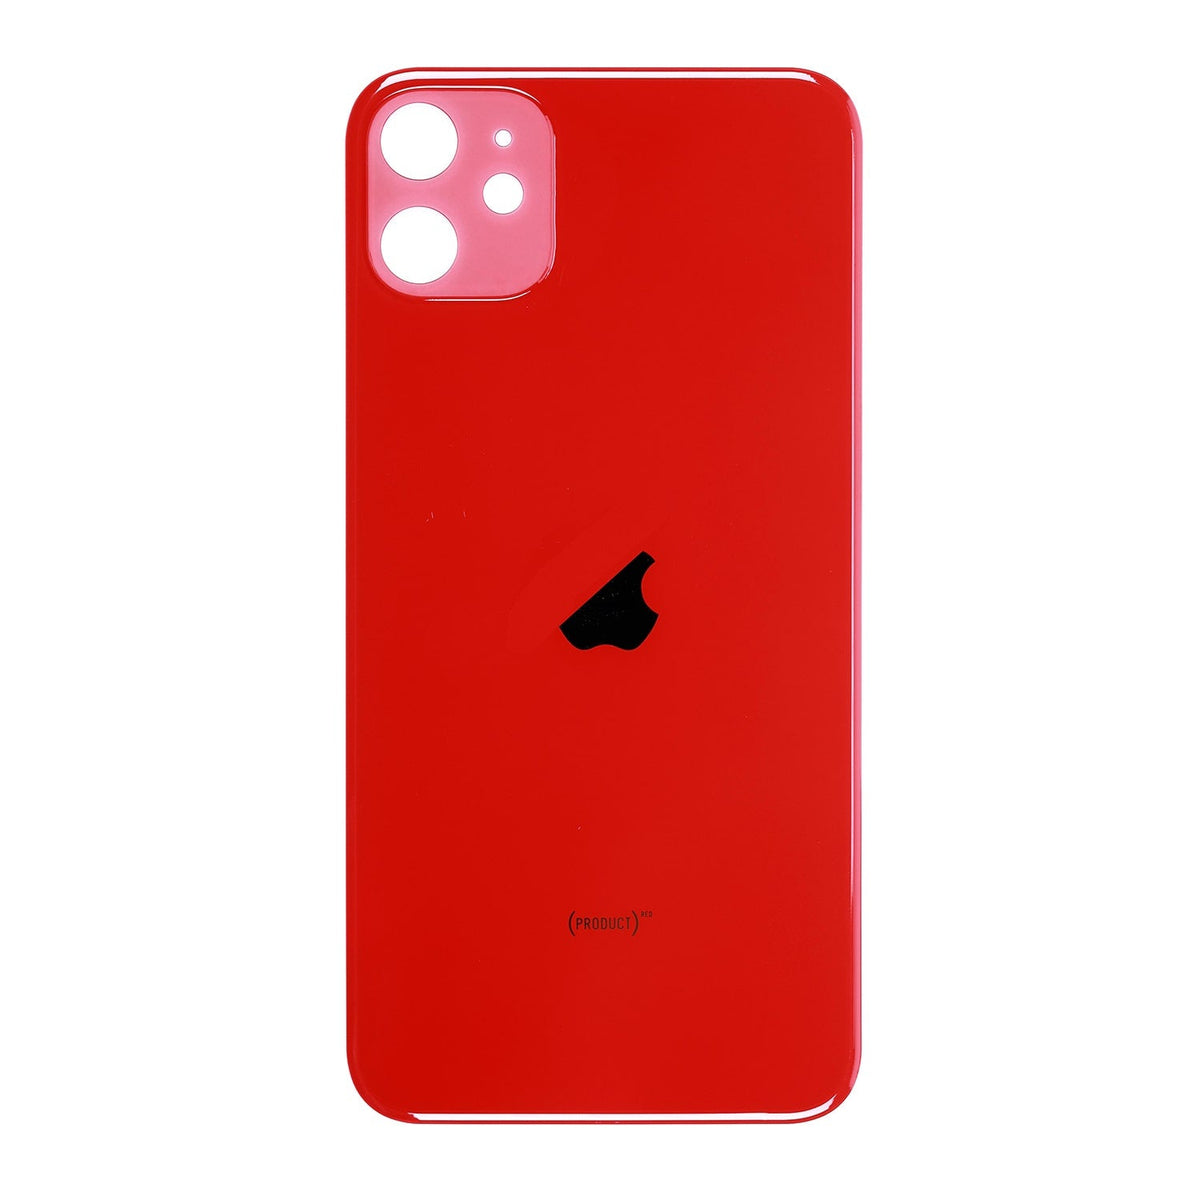 RED BACK COVER FOR IPHONE 11